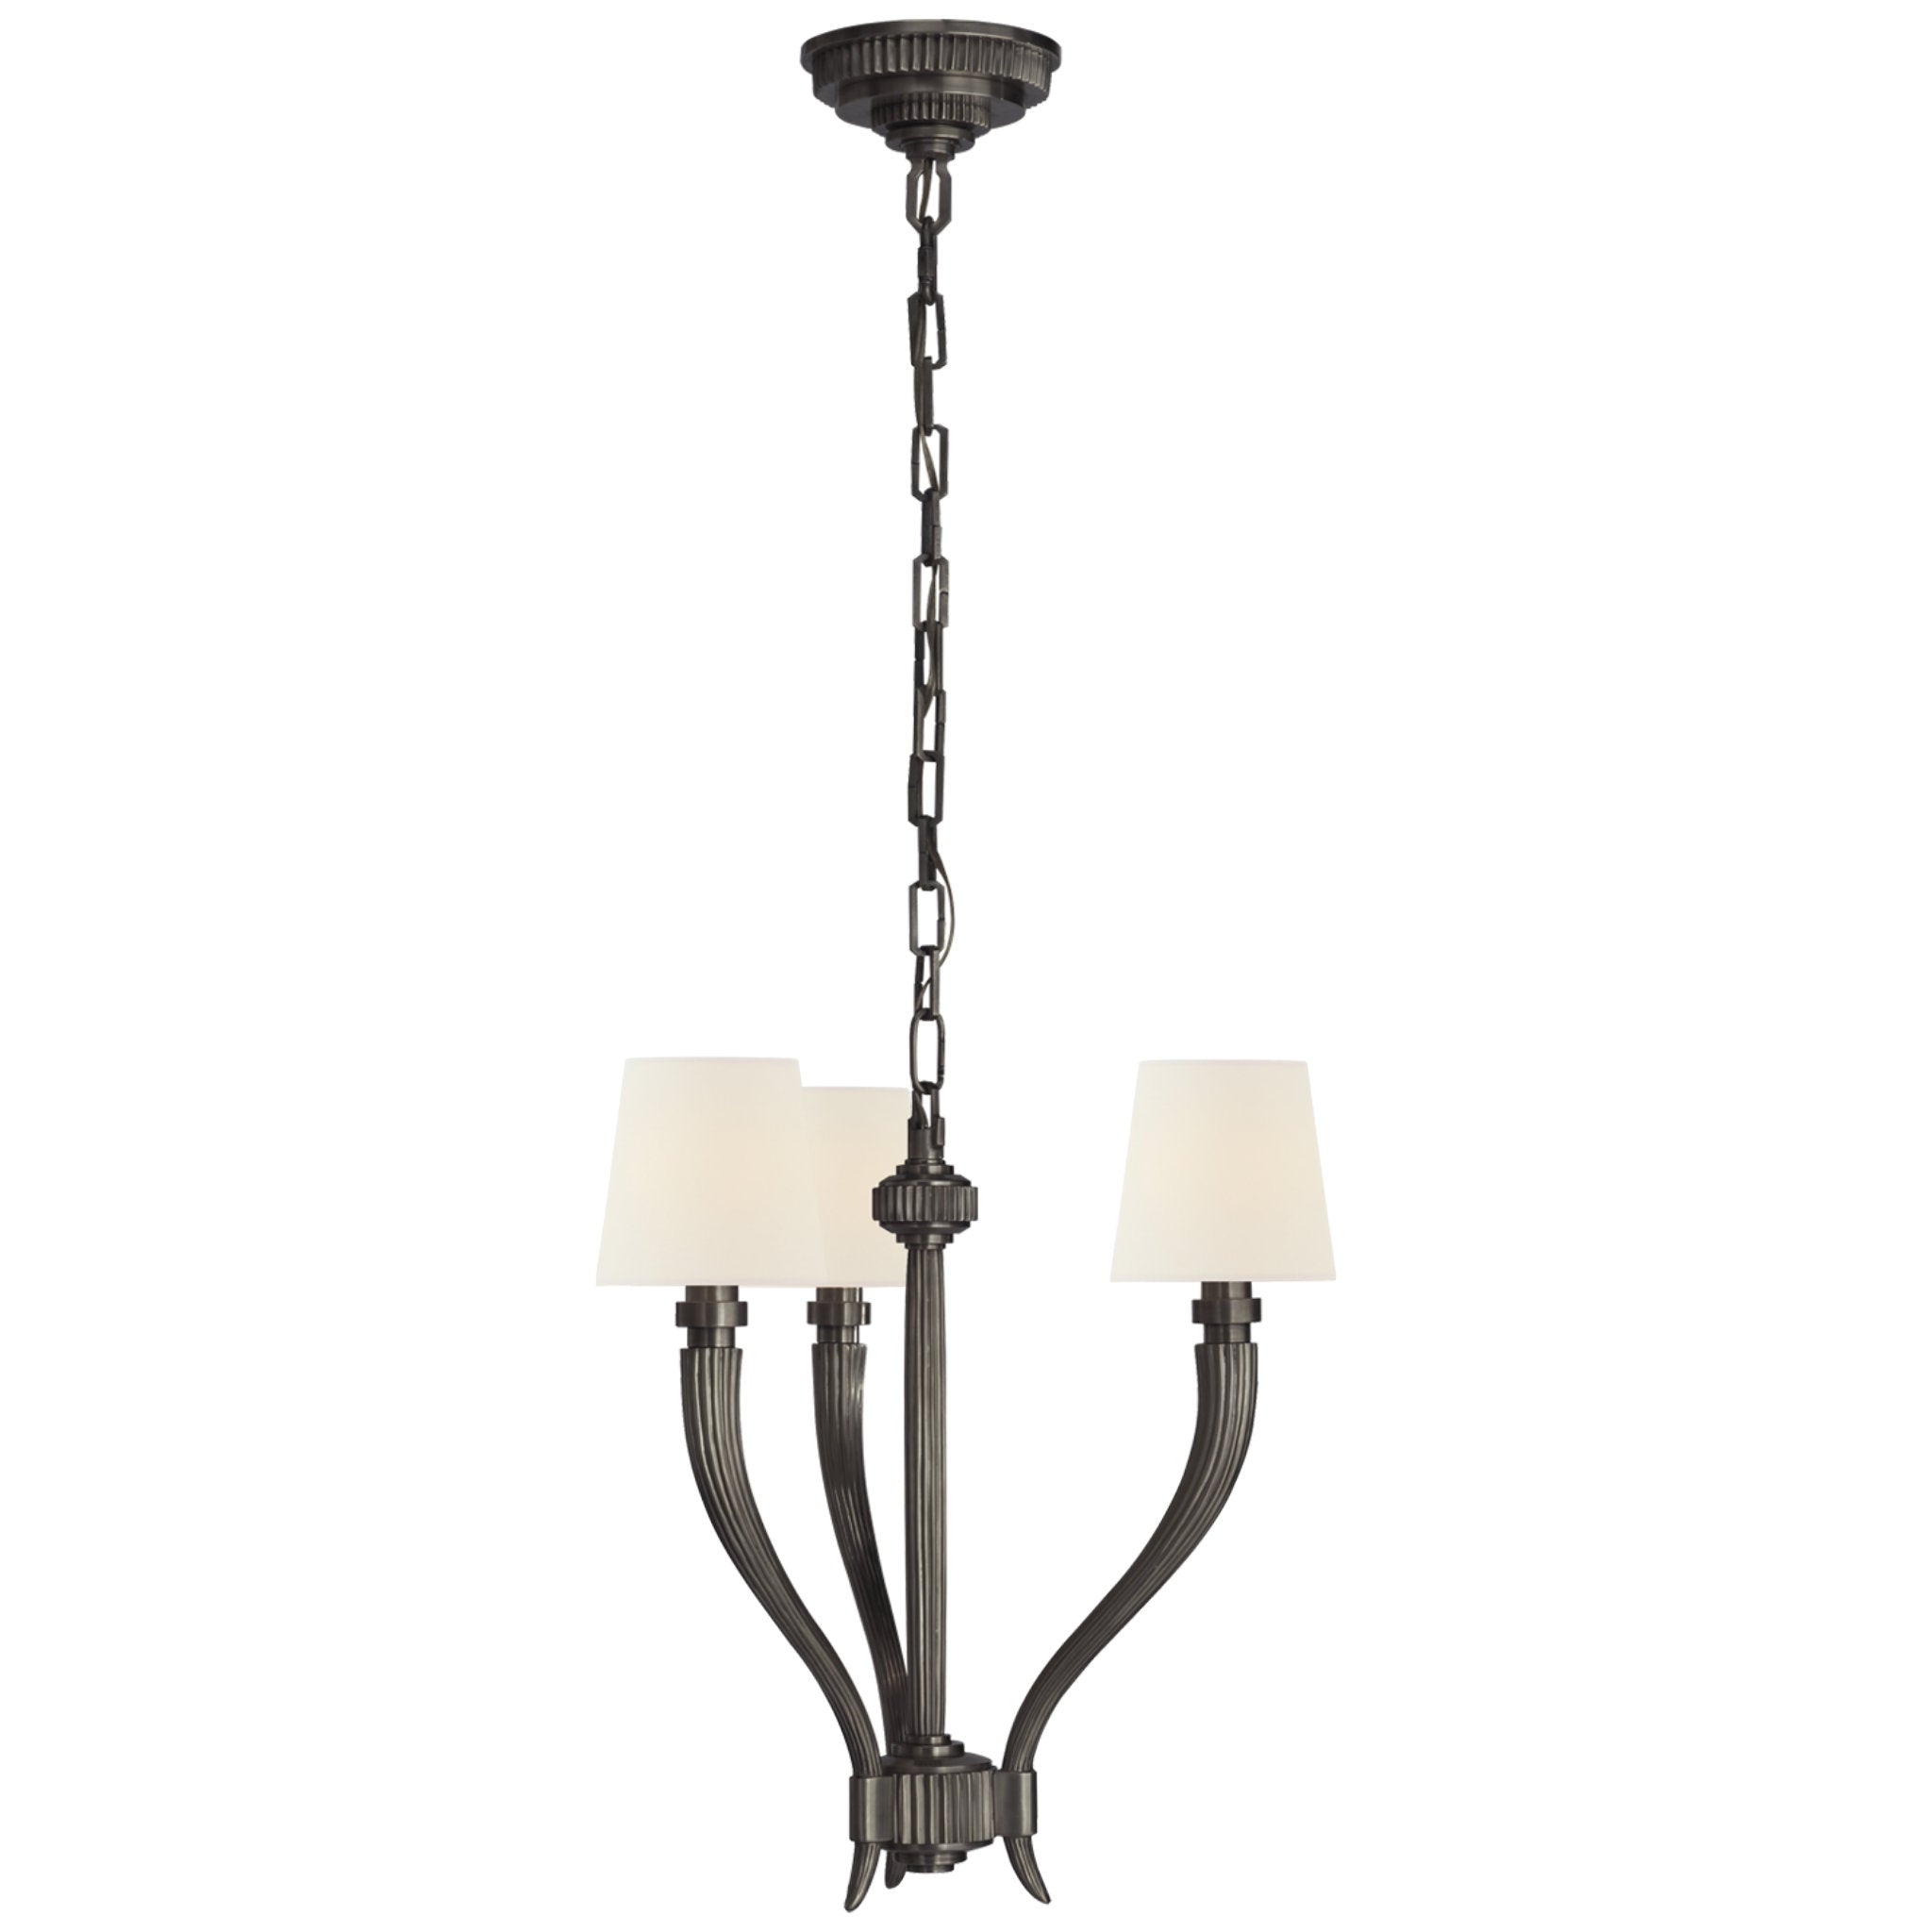 Chapman & Myers Ruhlmann Small Chandelier in Bronze with Linen Shades